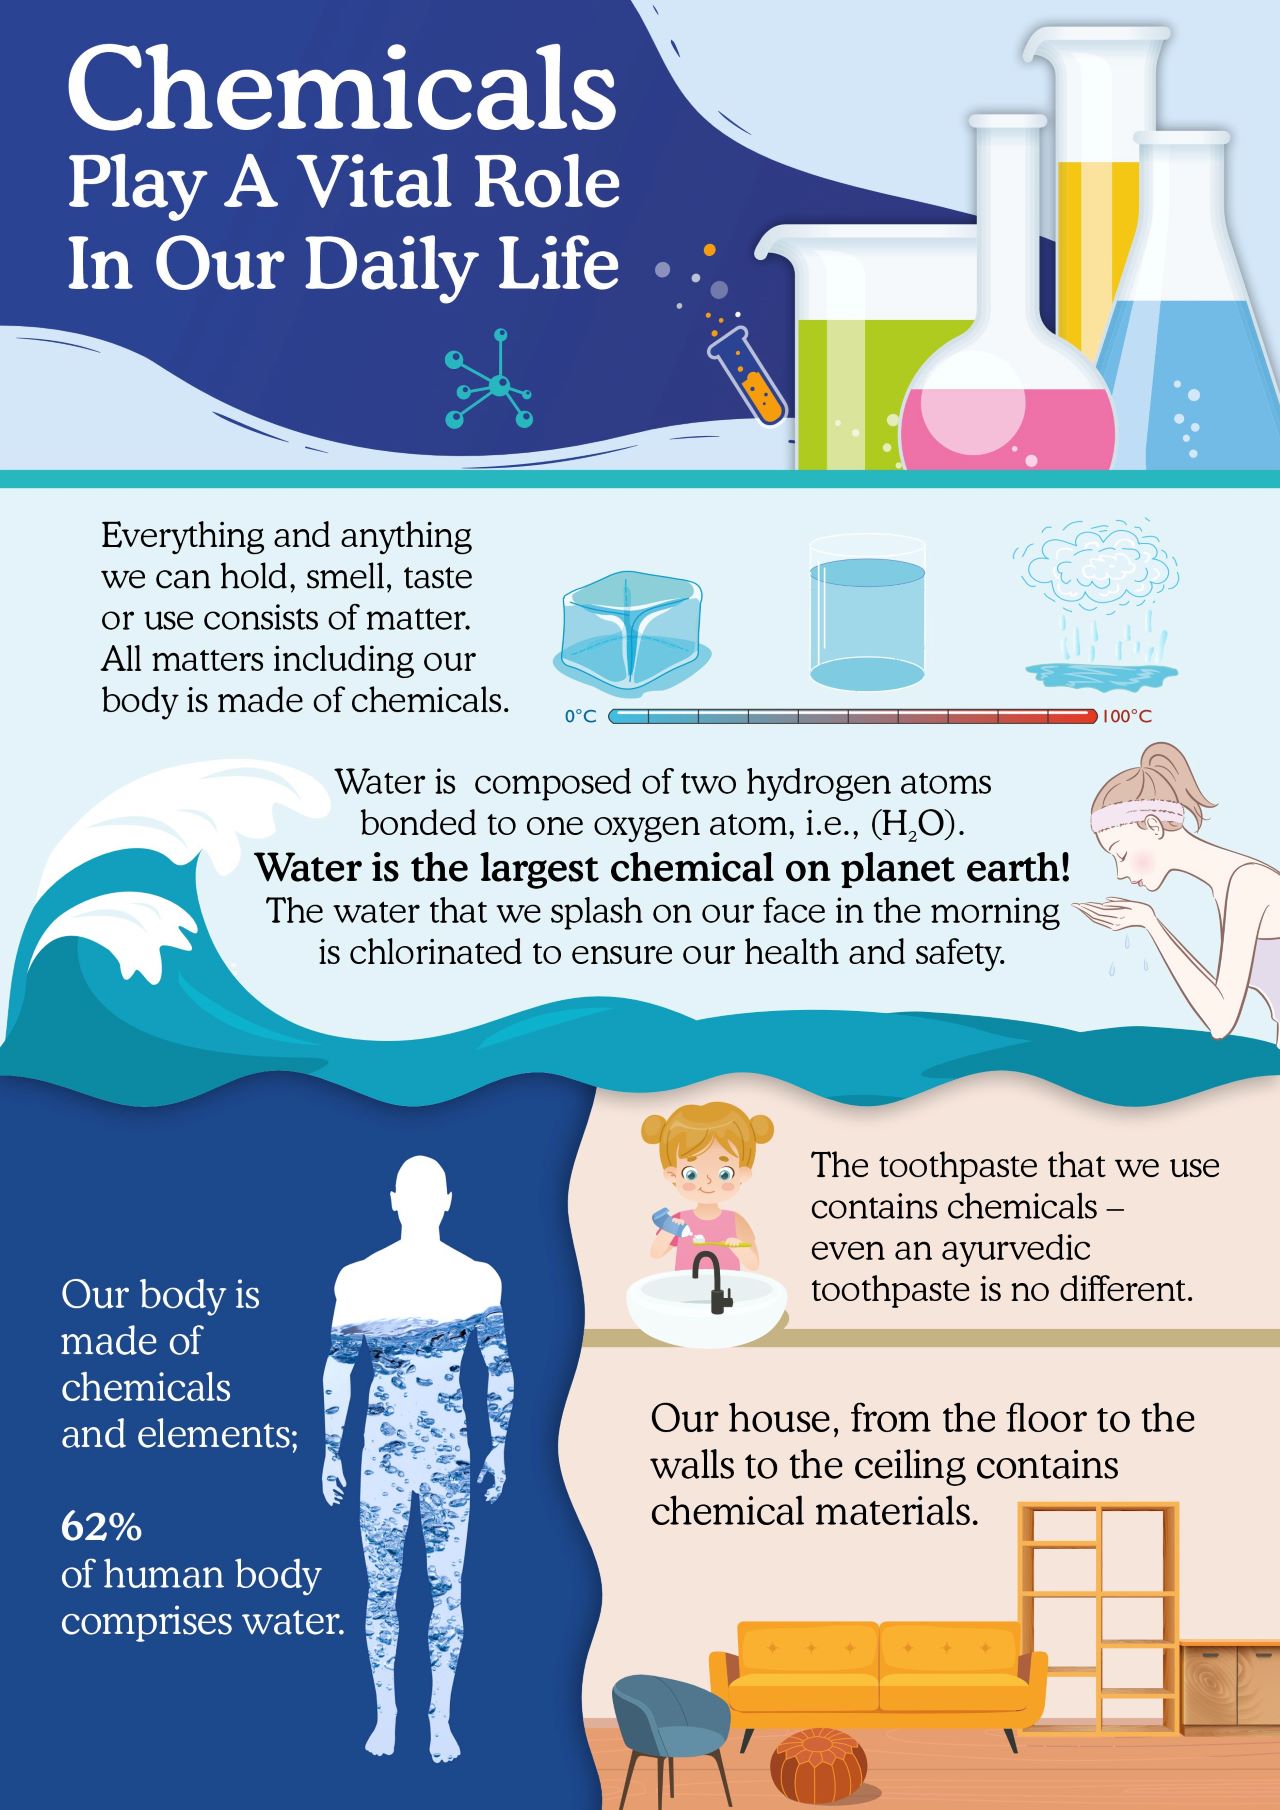 Chemicals play a vital role in our daily life 1